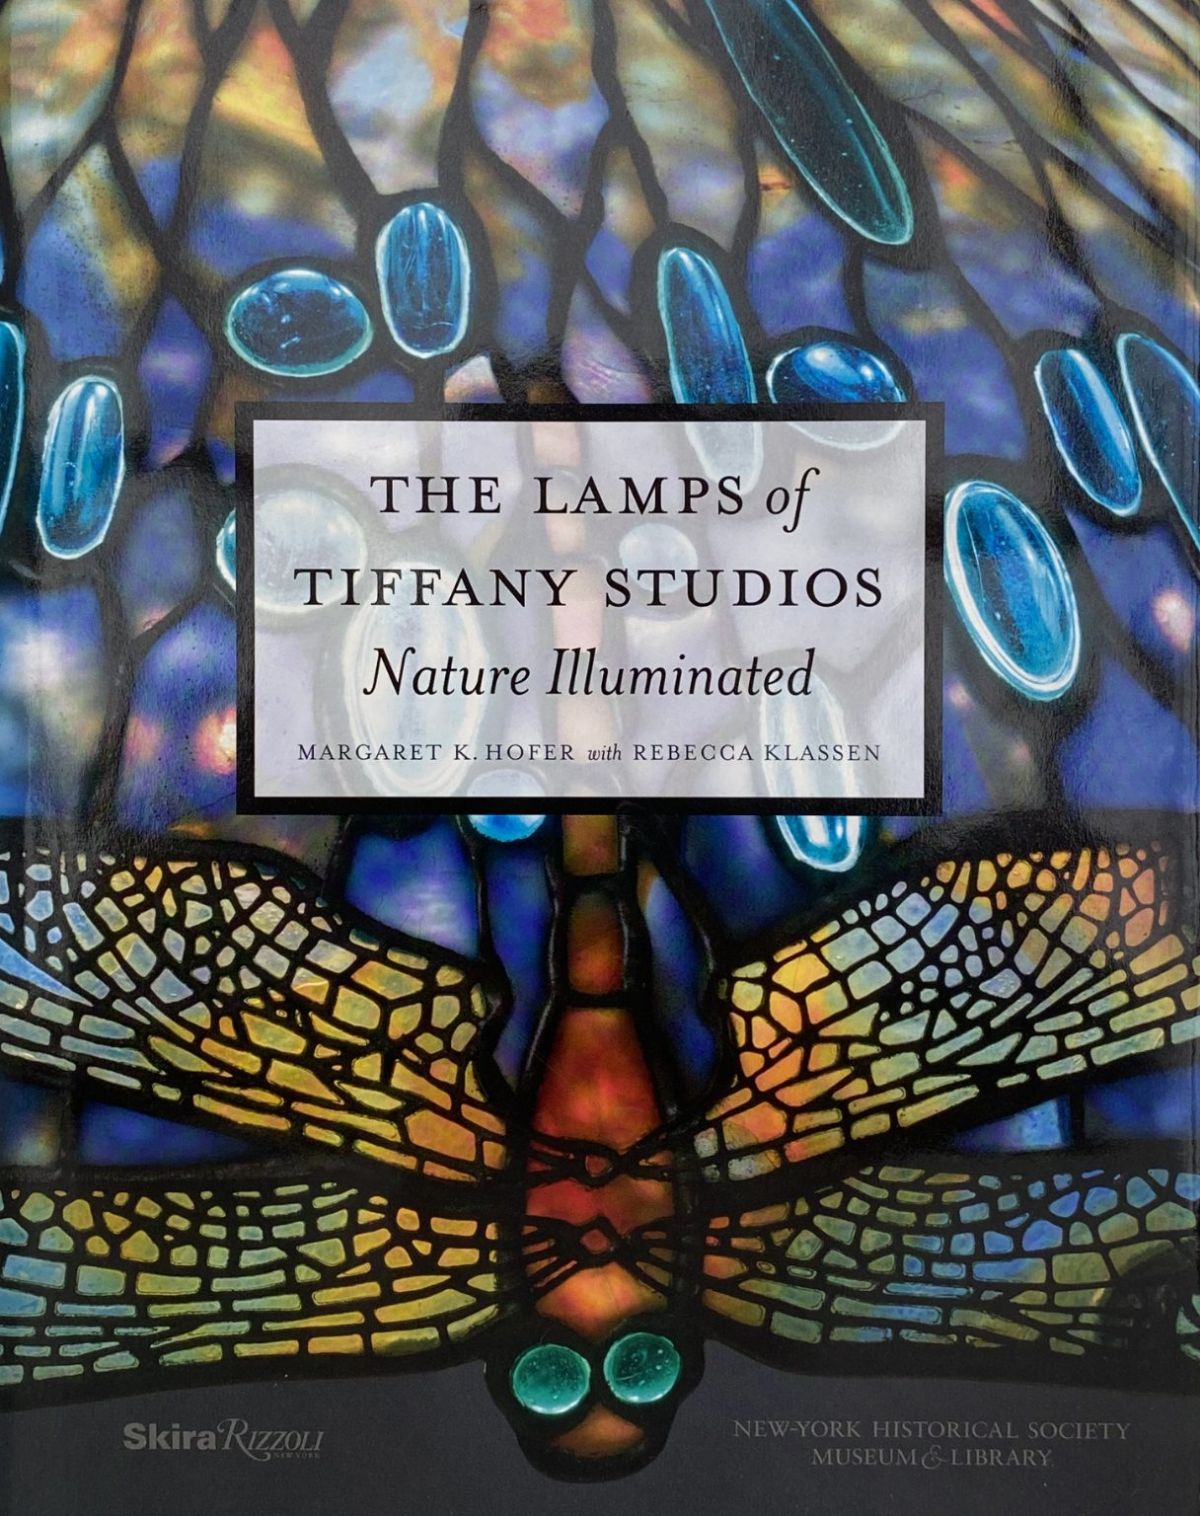 THE THE LAMPS OF TIFFANY STUDIOS